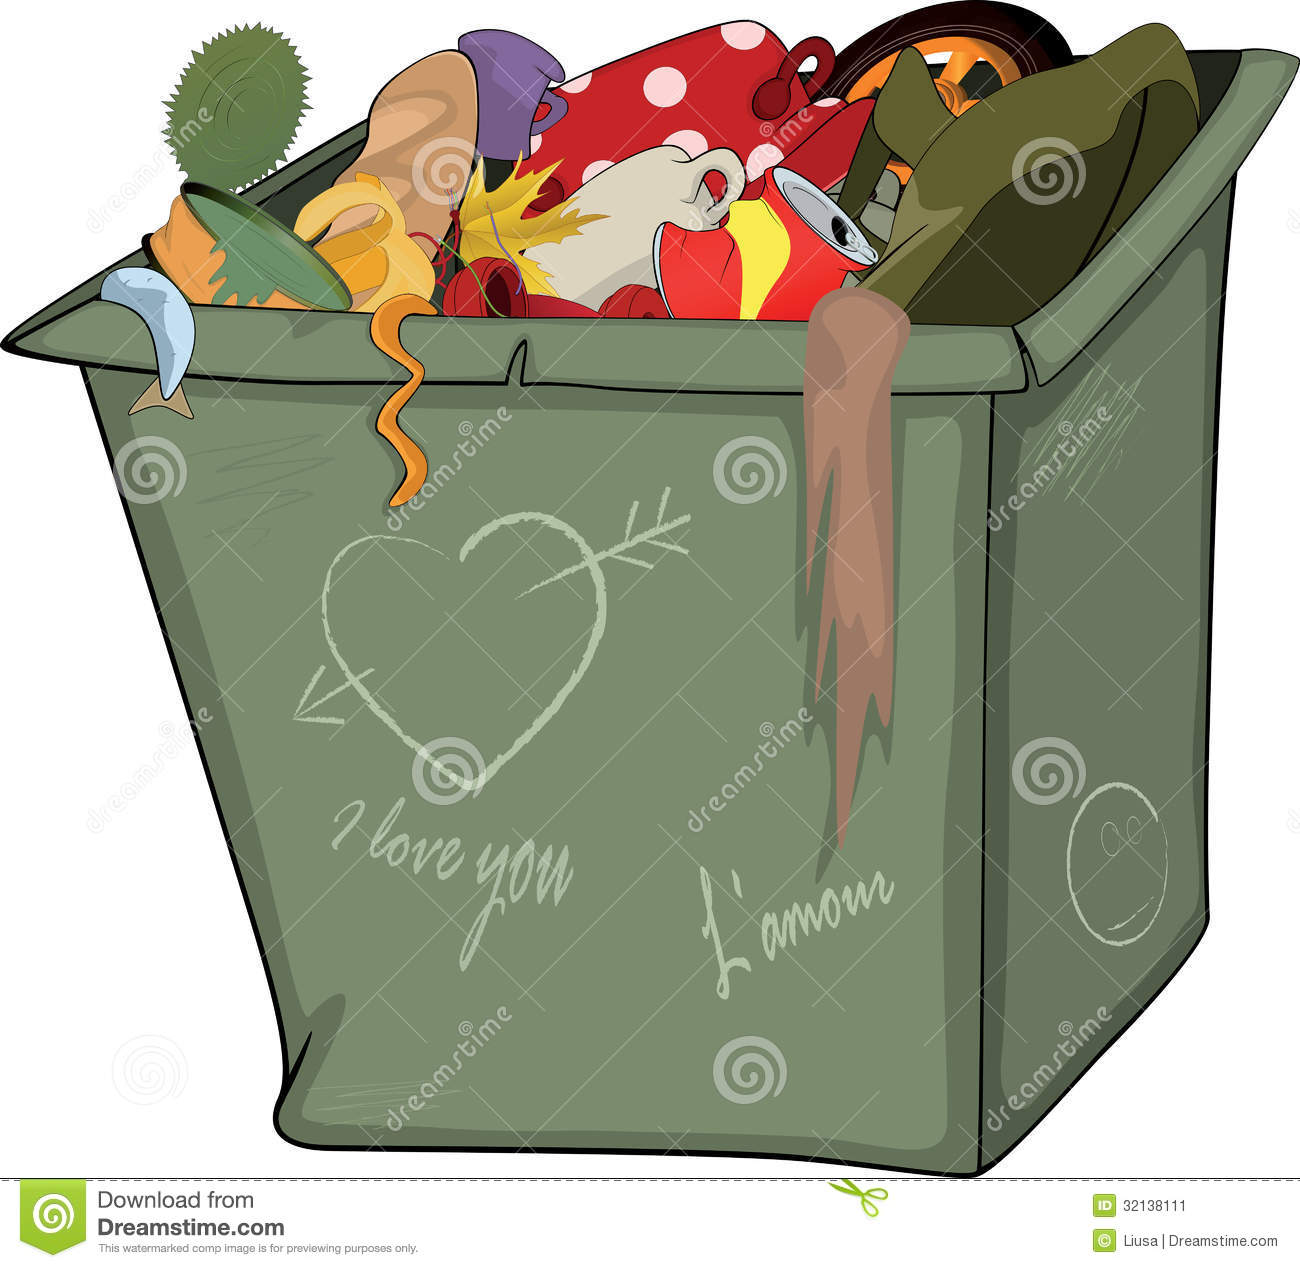 Waste Container  Cartoon Stock Image   Image  32138111